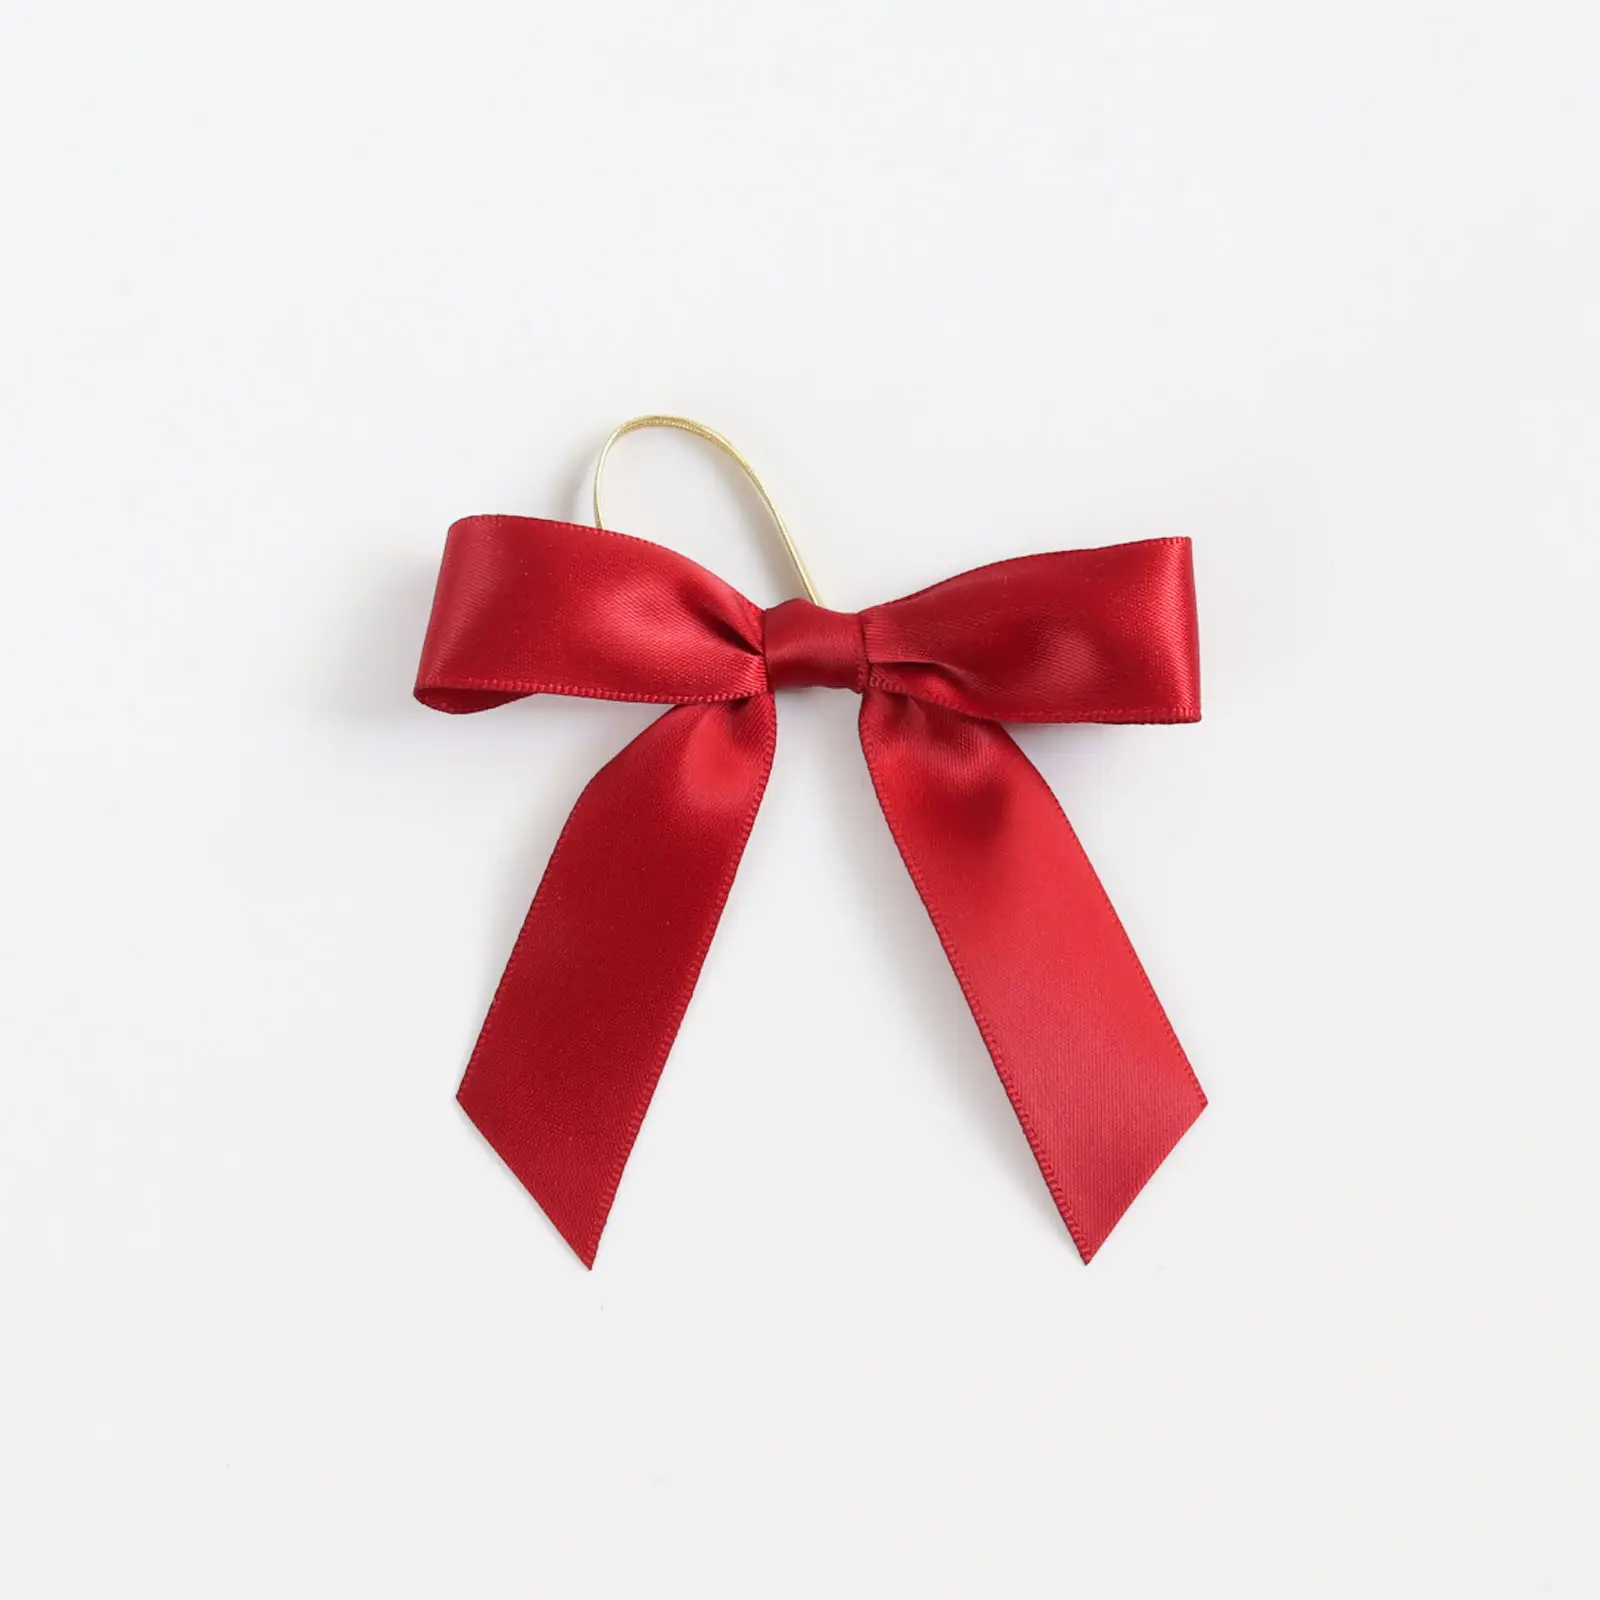 Most popular red ready pre made perfume bottle satin ribbon bow tie with elastic band